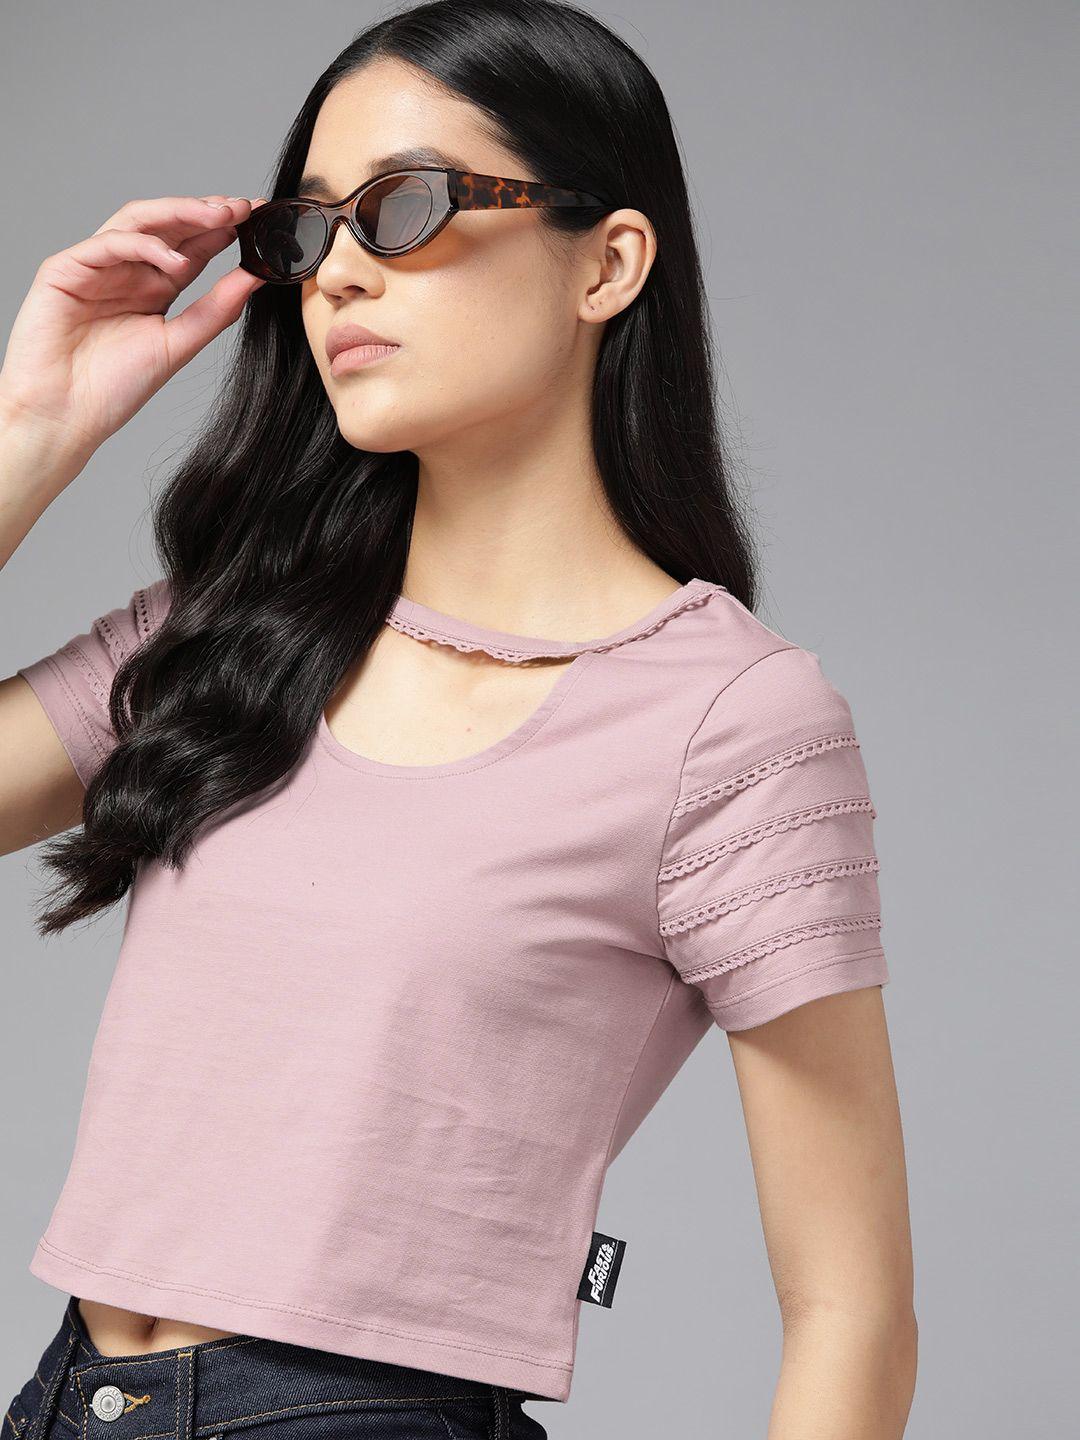 the roadster lifestyle co. cut out & lace detail top